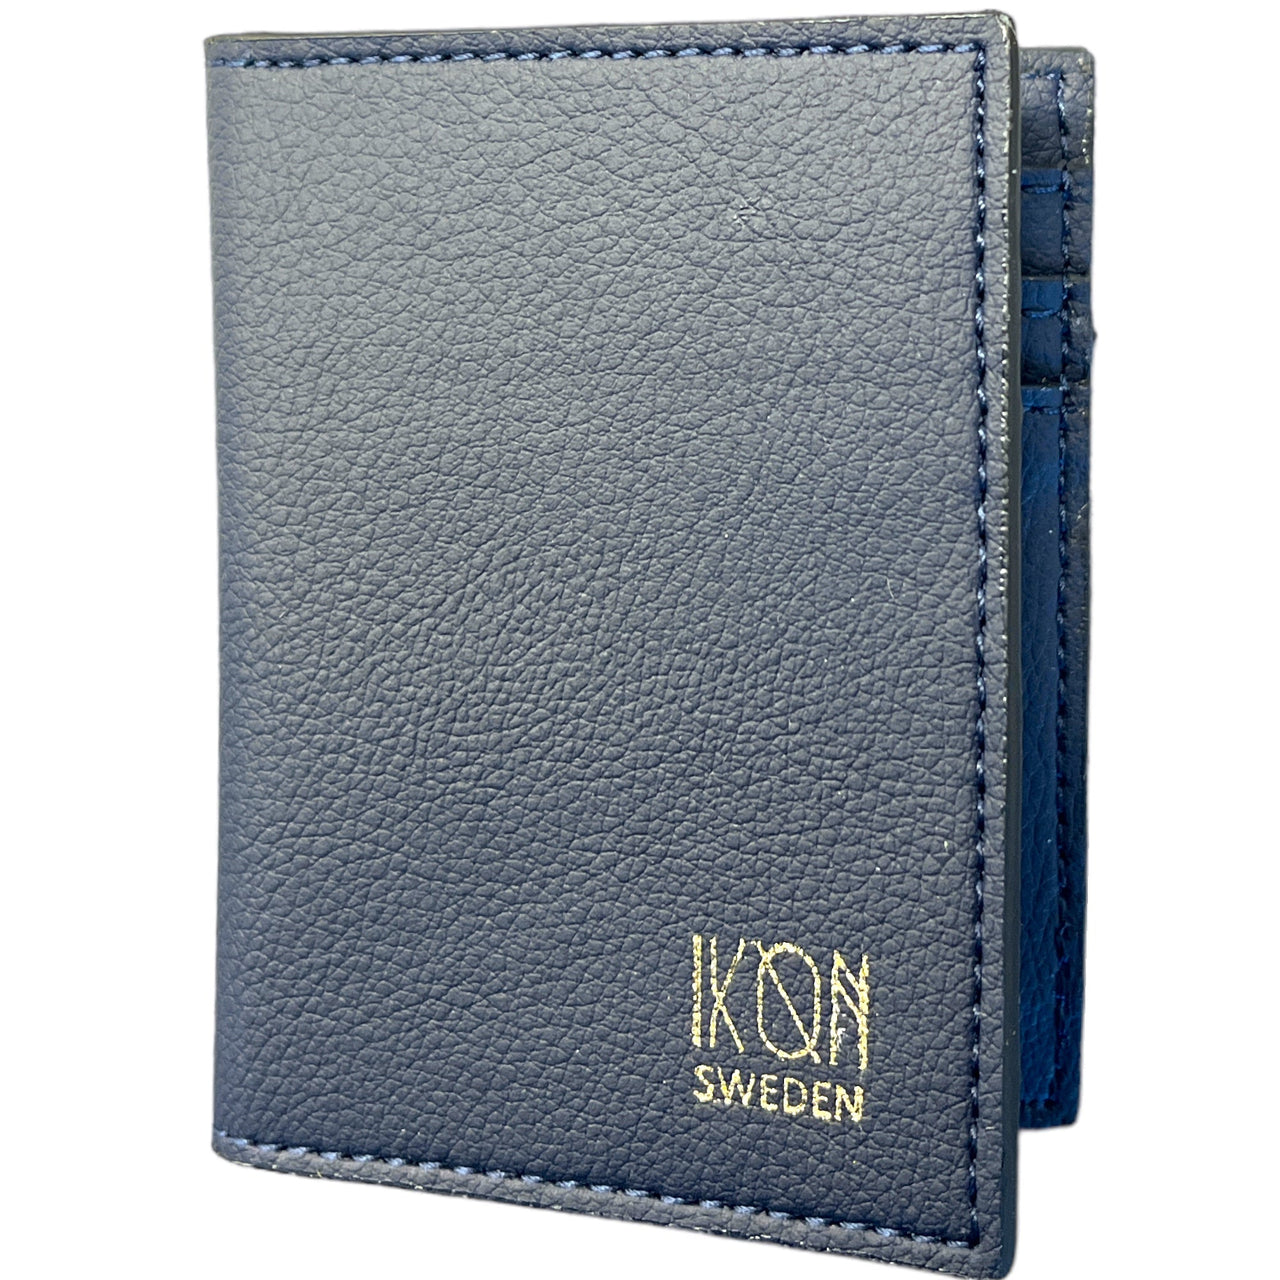 Cactus Leather BiFold Card Wallet - Navy Blue